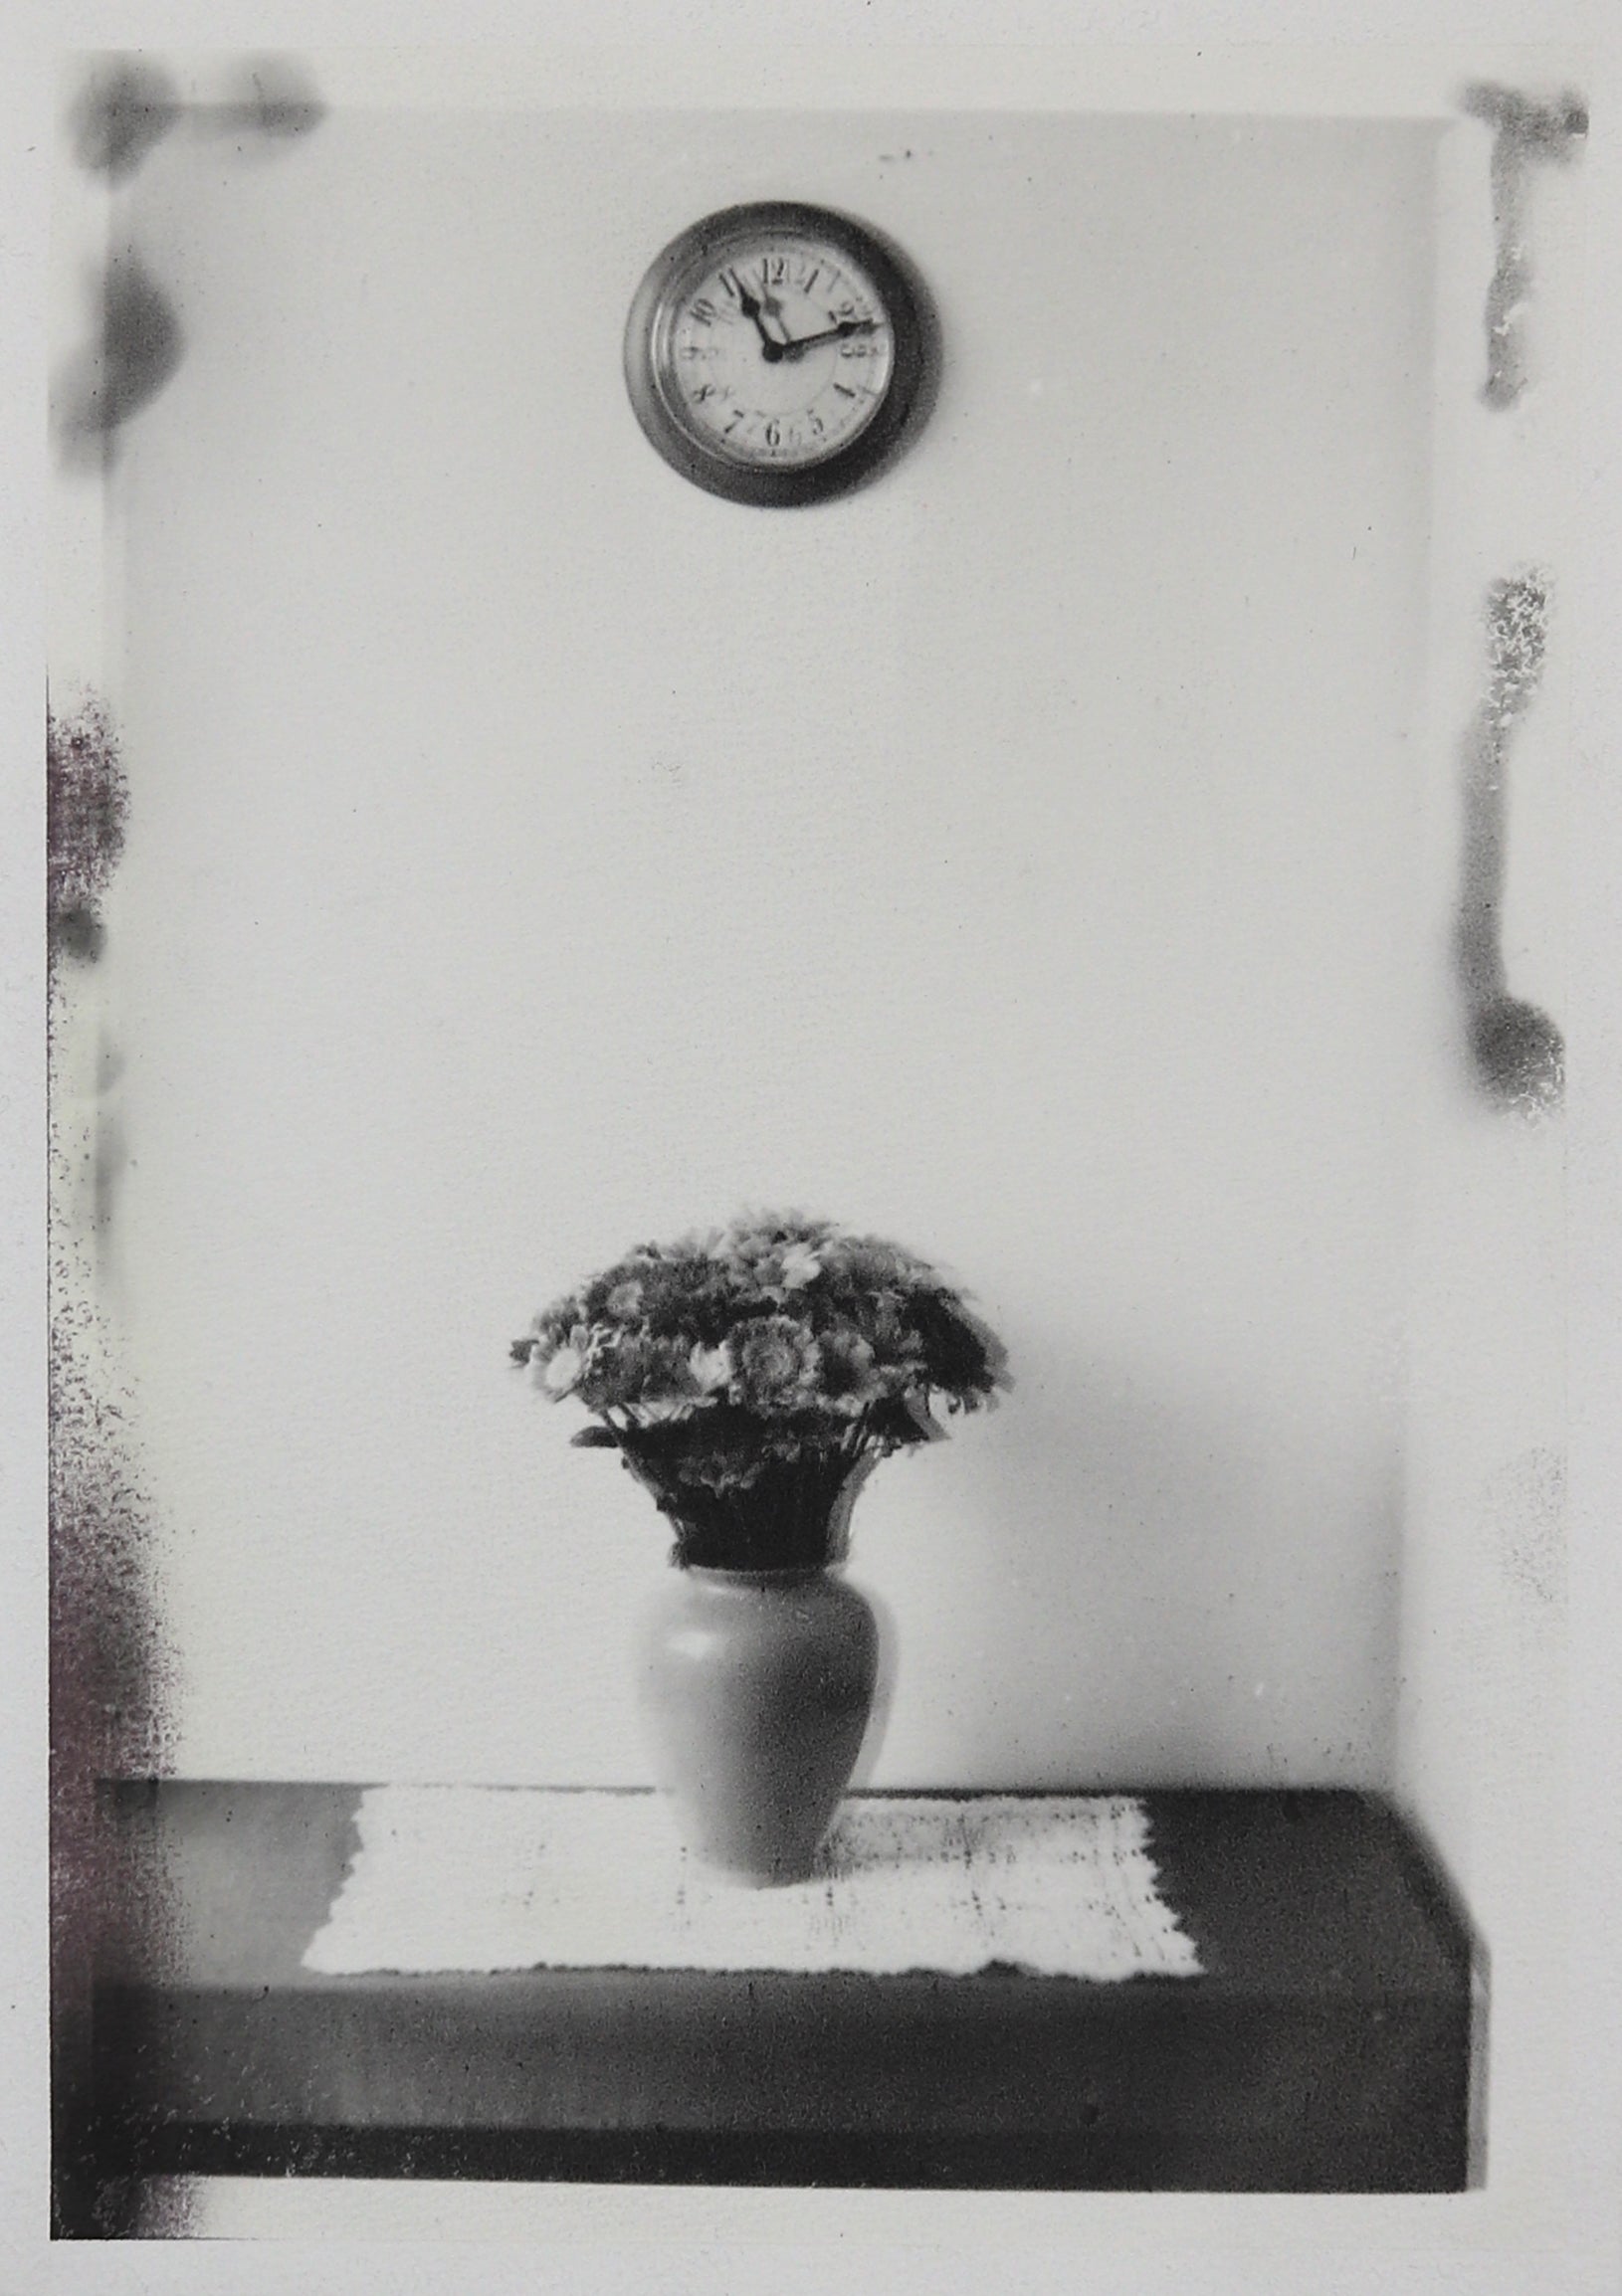 Michael Boffey 'Double exposure, Still Life With Clock', 2020 Silver gelatin print on watercolour paper 29.7x21cm